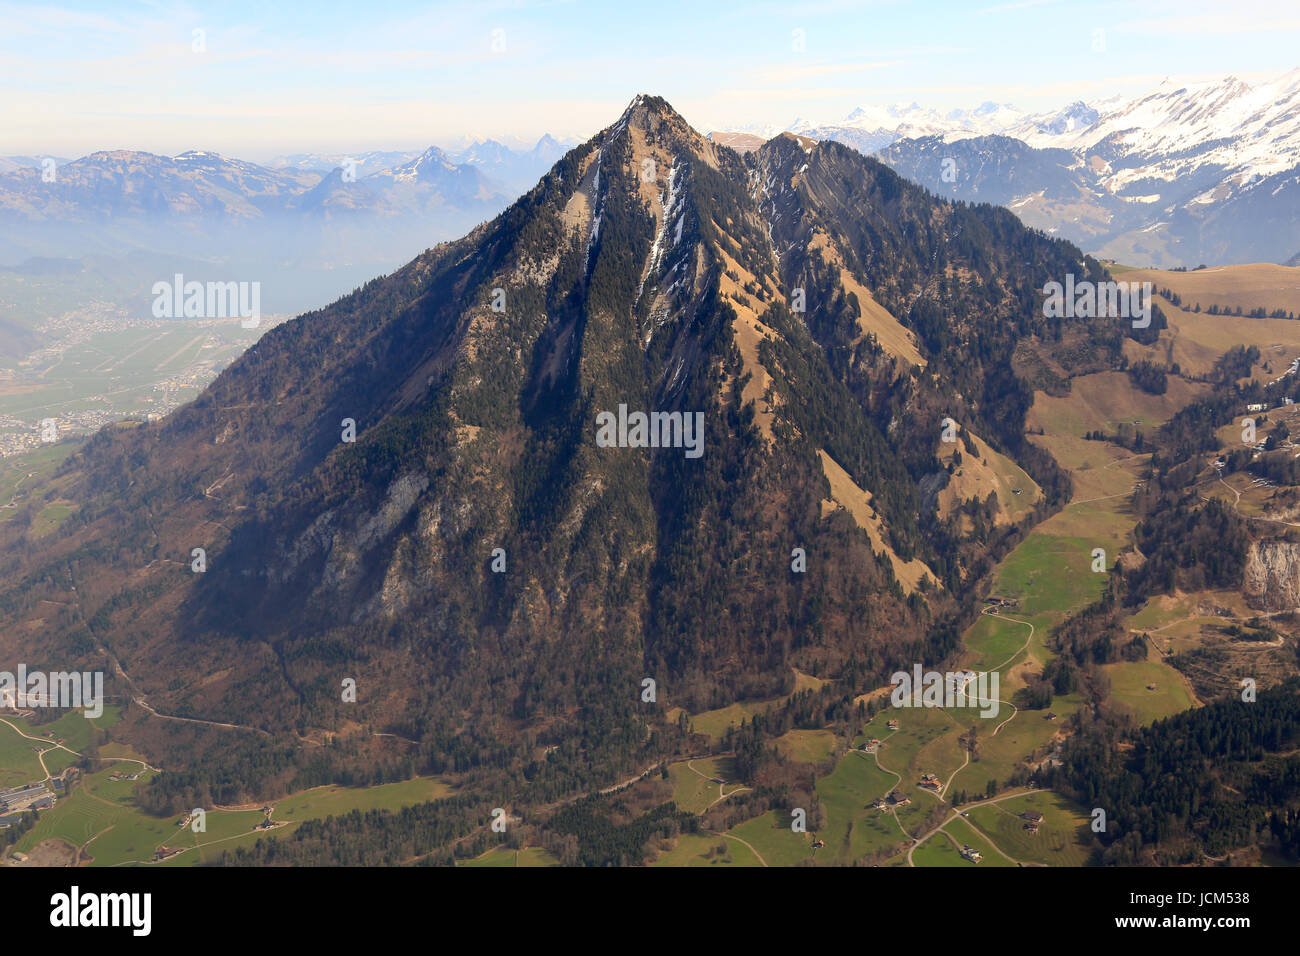 Stanserhorn mountain Switzerland Swiss Alps mountains aerial view photography photo Stock Photo